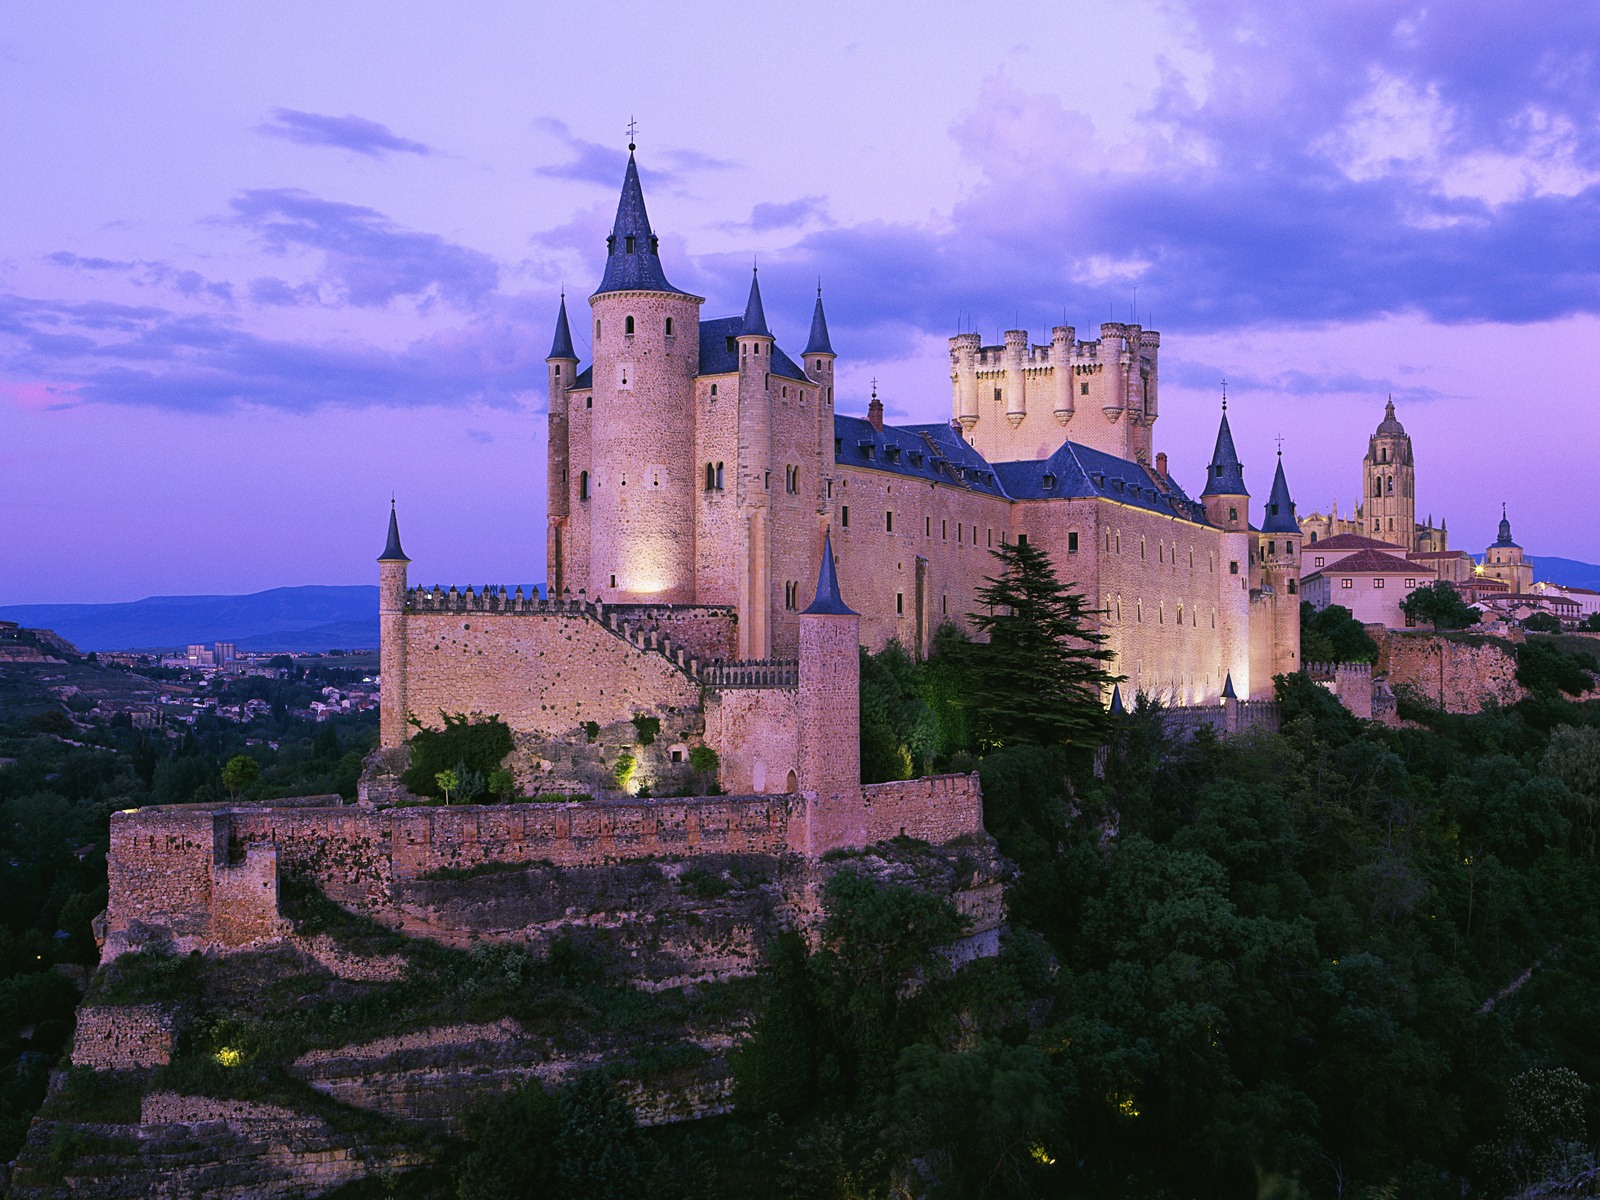 Windows 7 Wallpapers: Castles of Europe #1 - 1600x1200